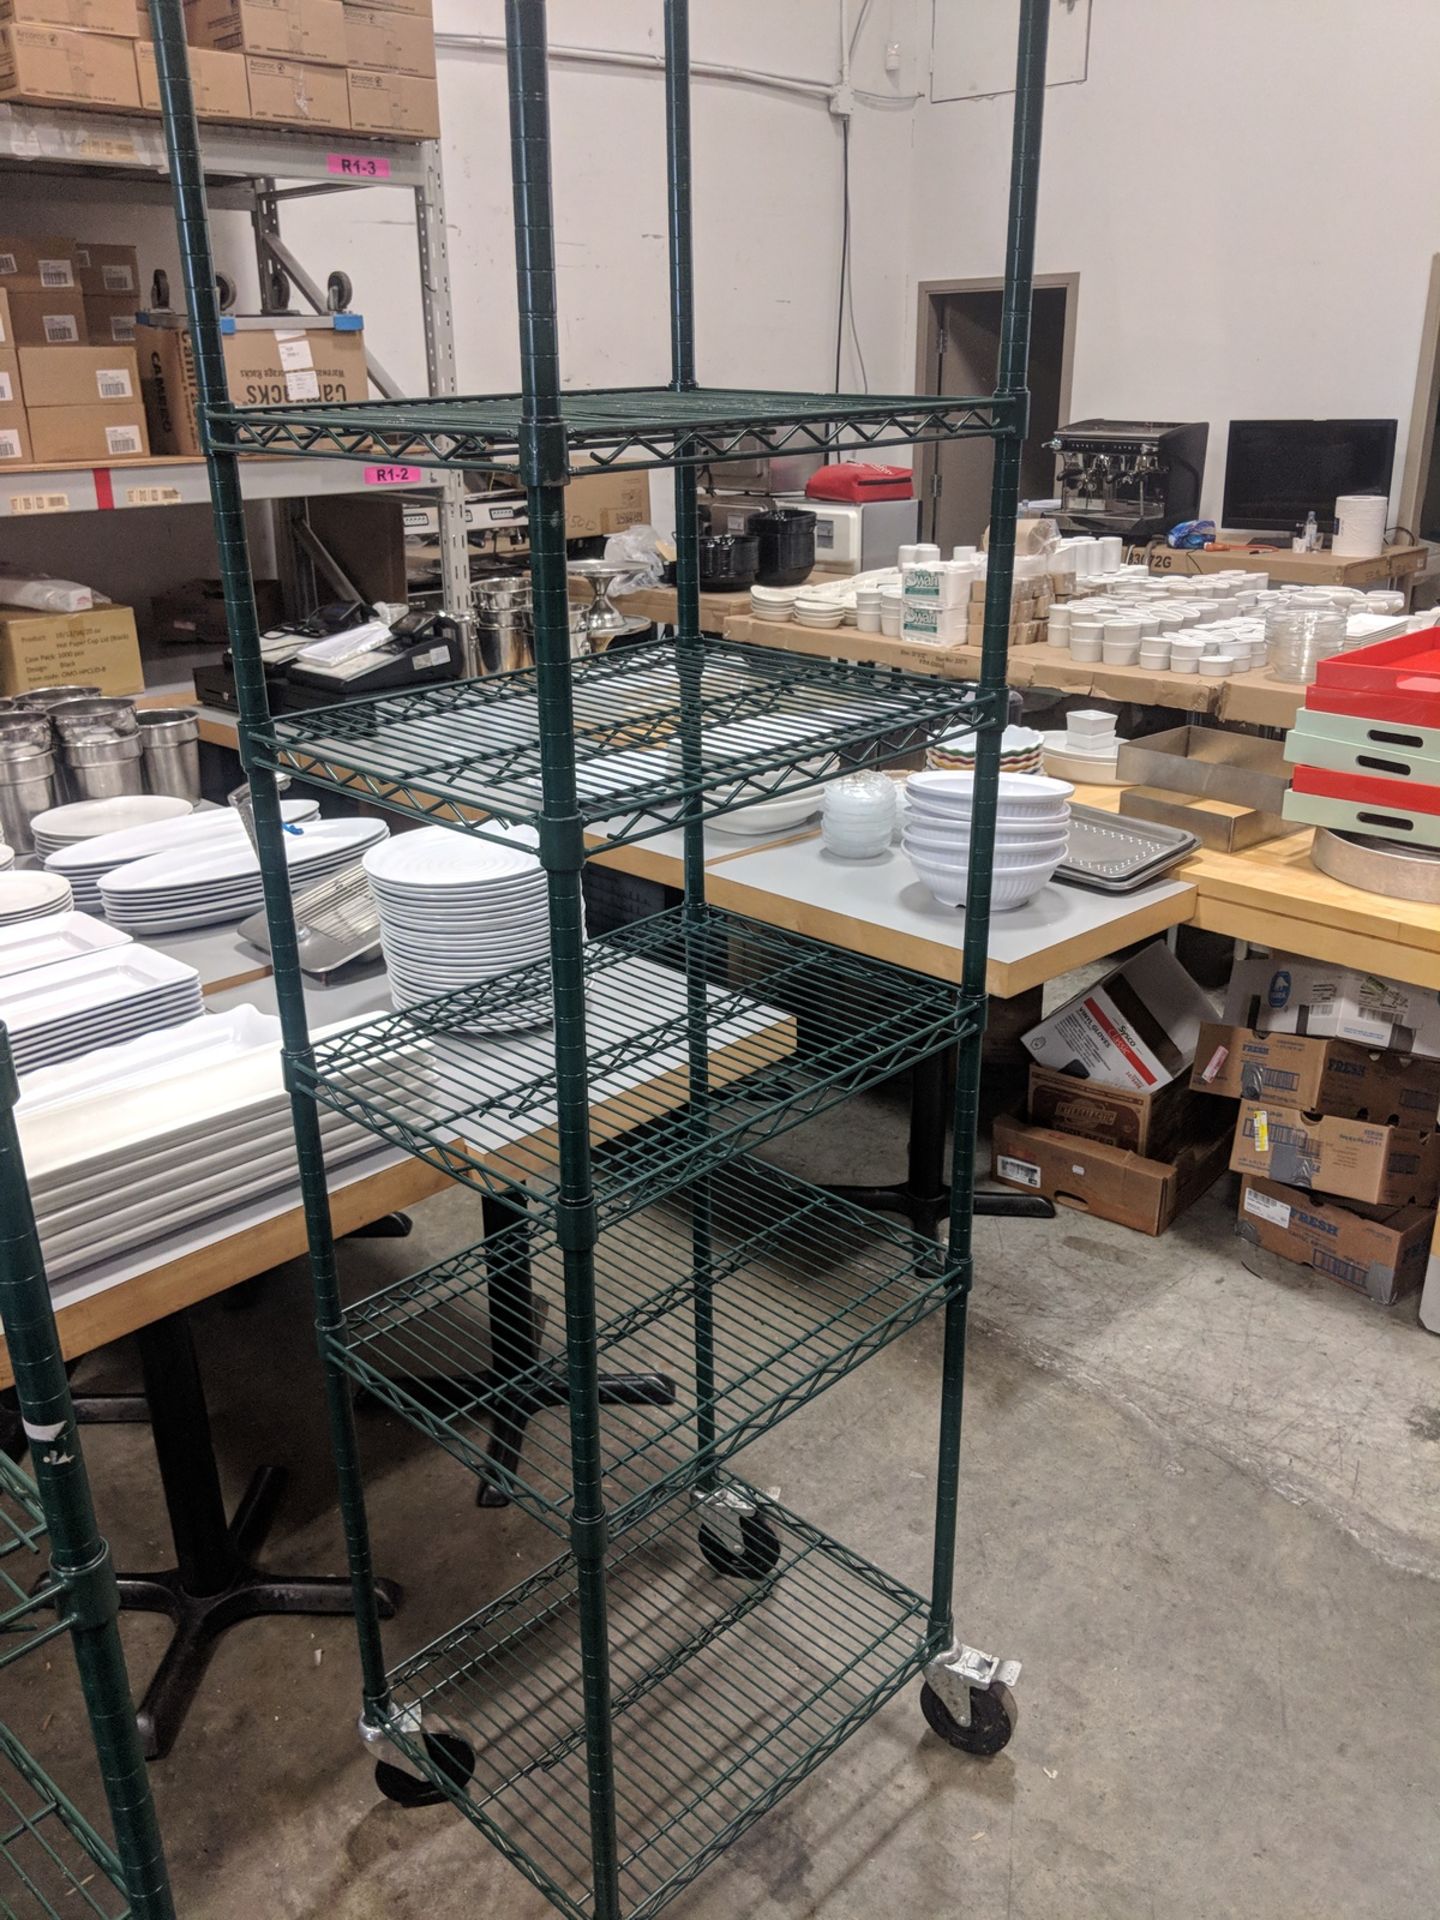 24" x 18" x 80" Five Tier Epoxy Shelving Kit on Casters - Image 2 of 2